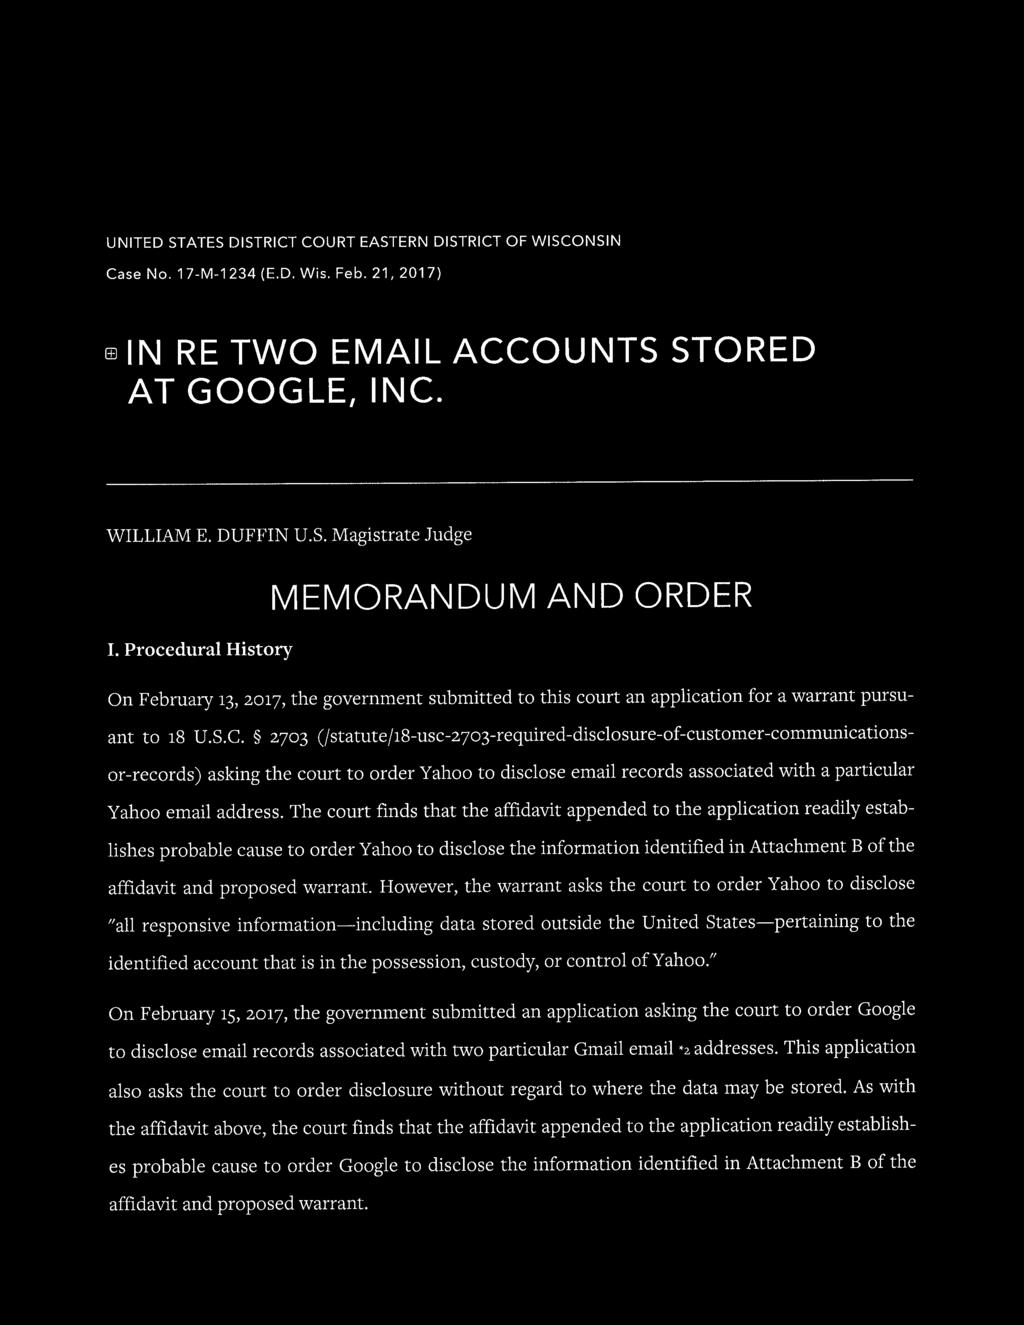 z~o3 (/statute/i8-use-2~o3-required-disclosure-of-customer-communicationsor-records) asking the court to order Yahoo to disclose email records associated with a particular Yahoo email address.